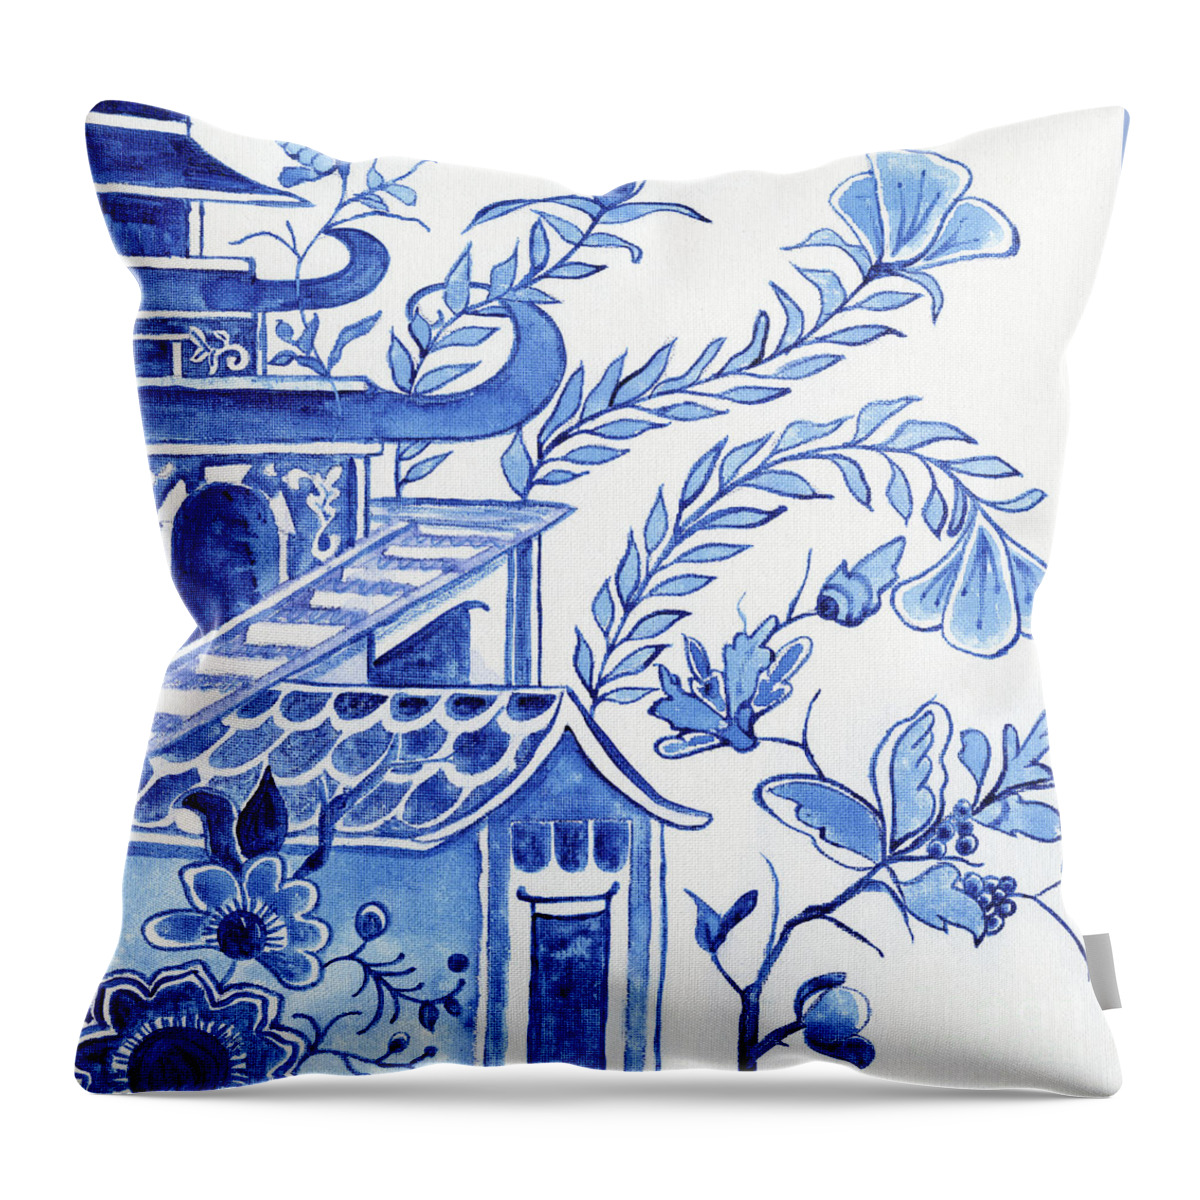 Chinoiserie Throw Pillow featuring the painting Chinoiserie Blue and White Pagoda Floral 1 by Audrey Jeanne Roberts